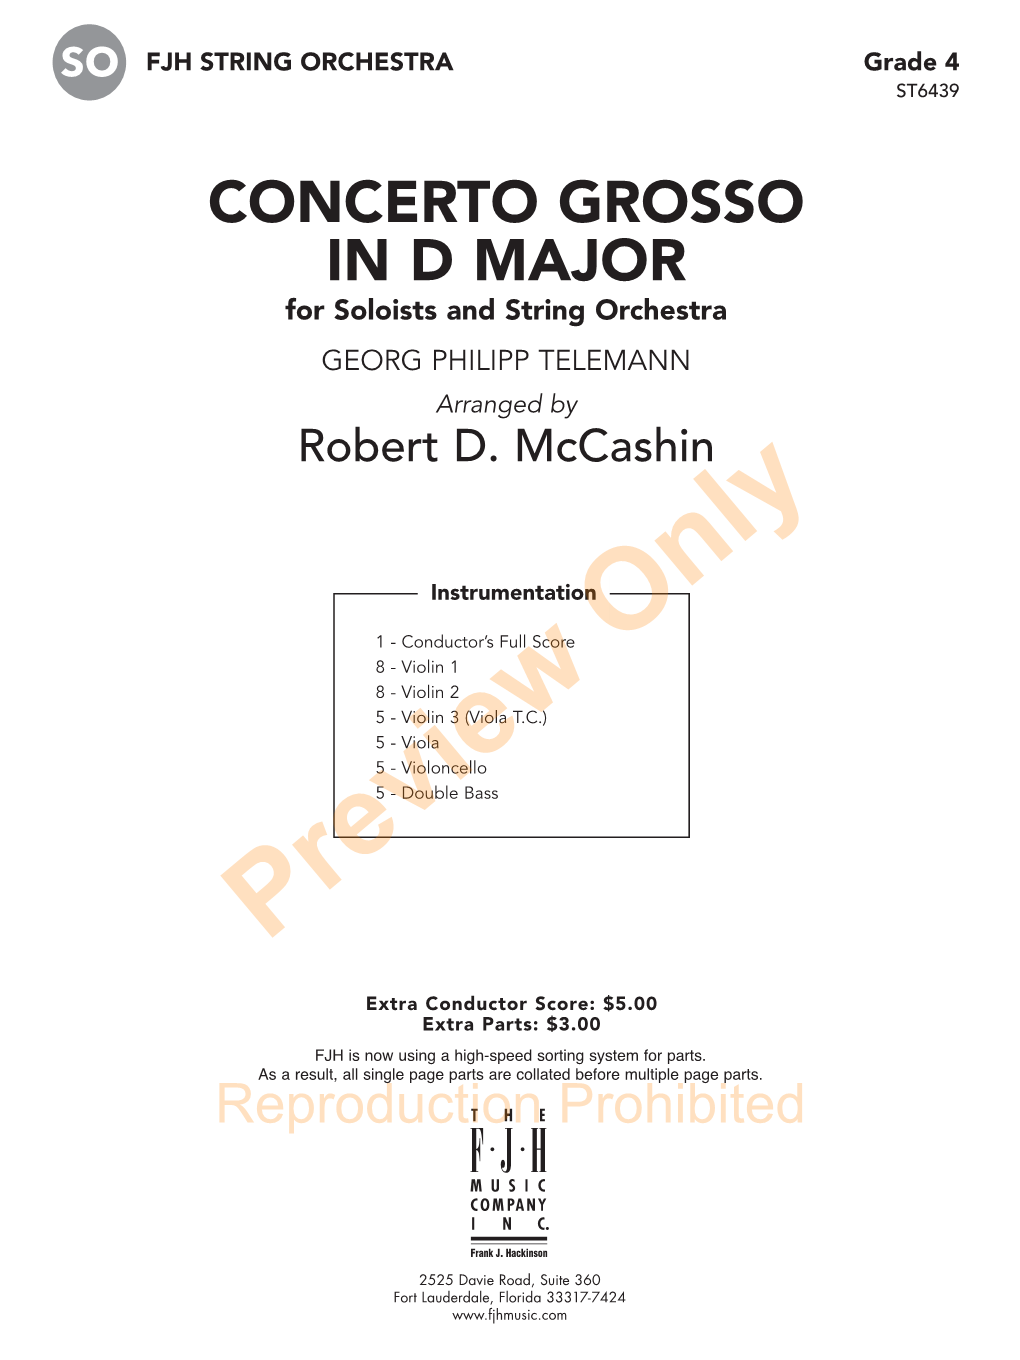 CONCERTO GROSSO in D MAJOR for Soloists and String Orchestra GEORG PHILIPP TELEMANN Arranged by Robert D